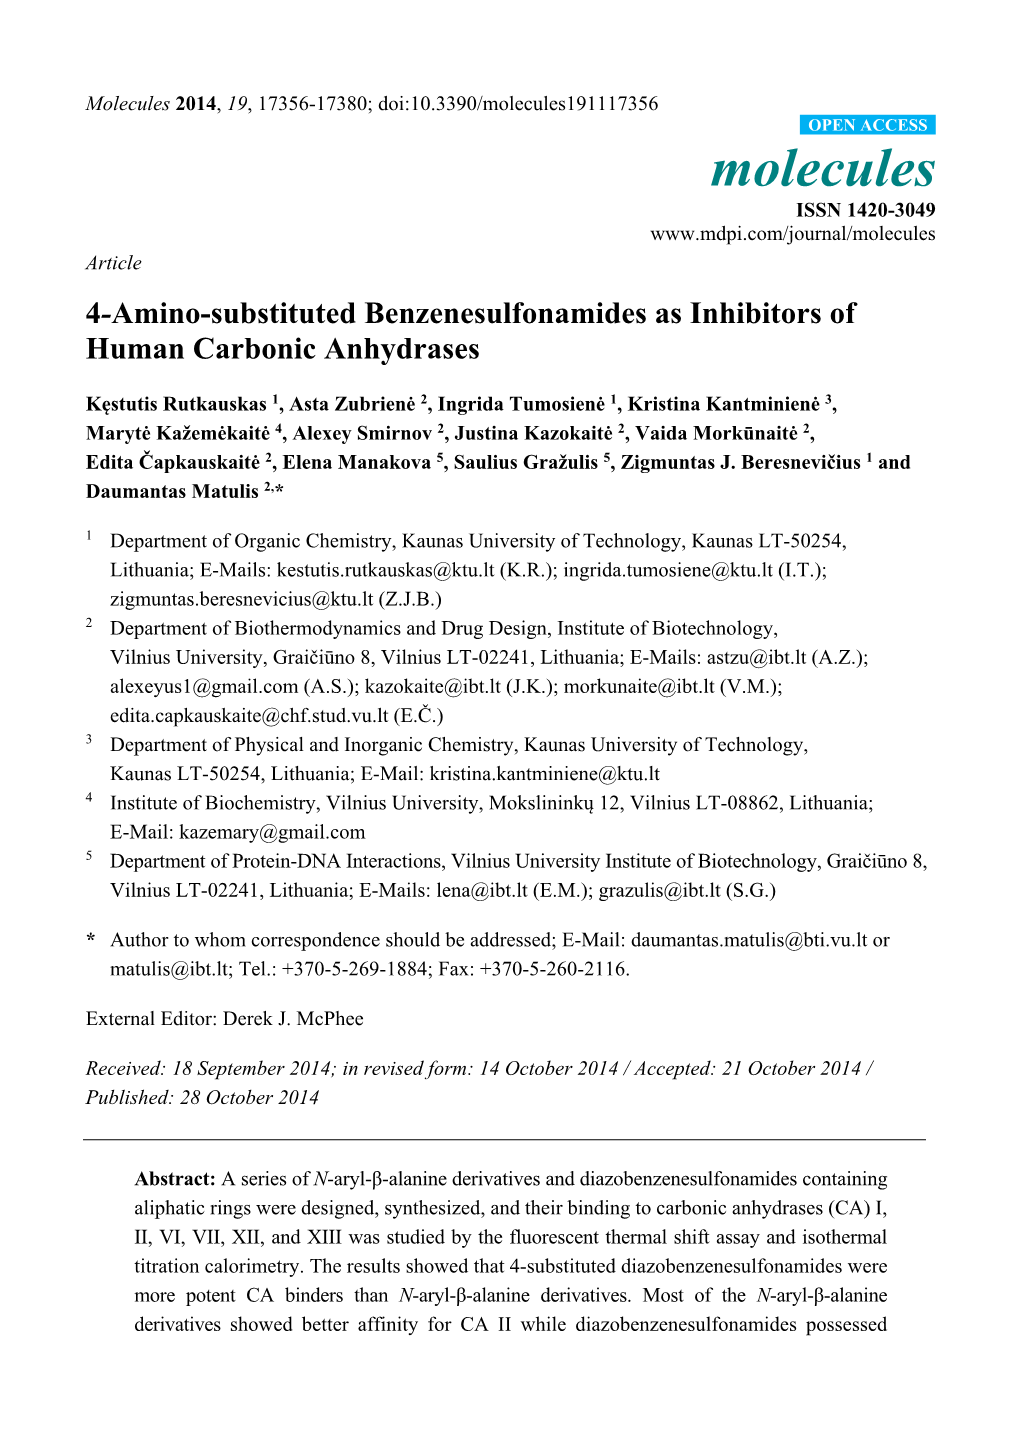 4-Amino-Substituted Benzenesulfonamides As Inhibitors of Human Carbonic Anhydrases